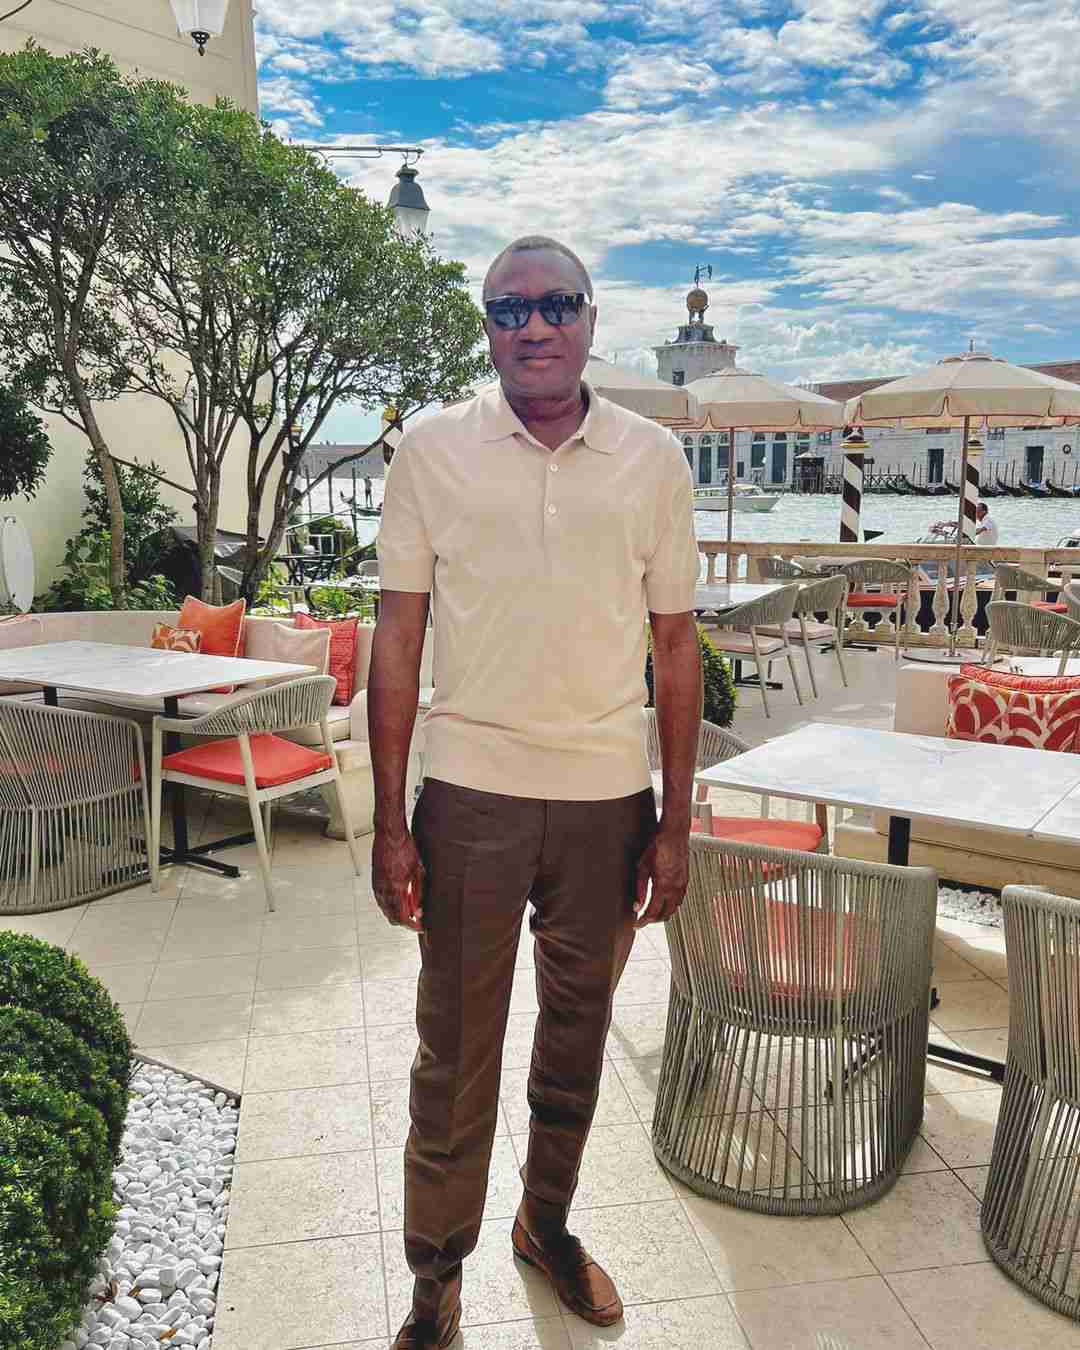 "I'm the child that you had with your secondary school girlfriend" – Man tells Femi Otedola, he responds